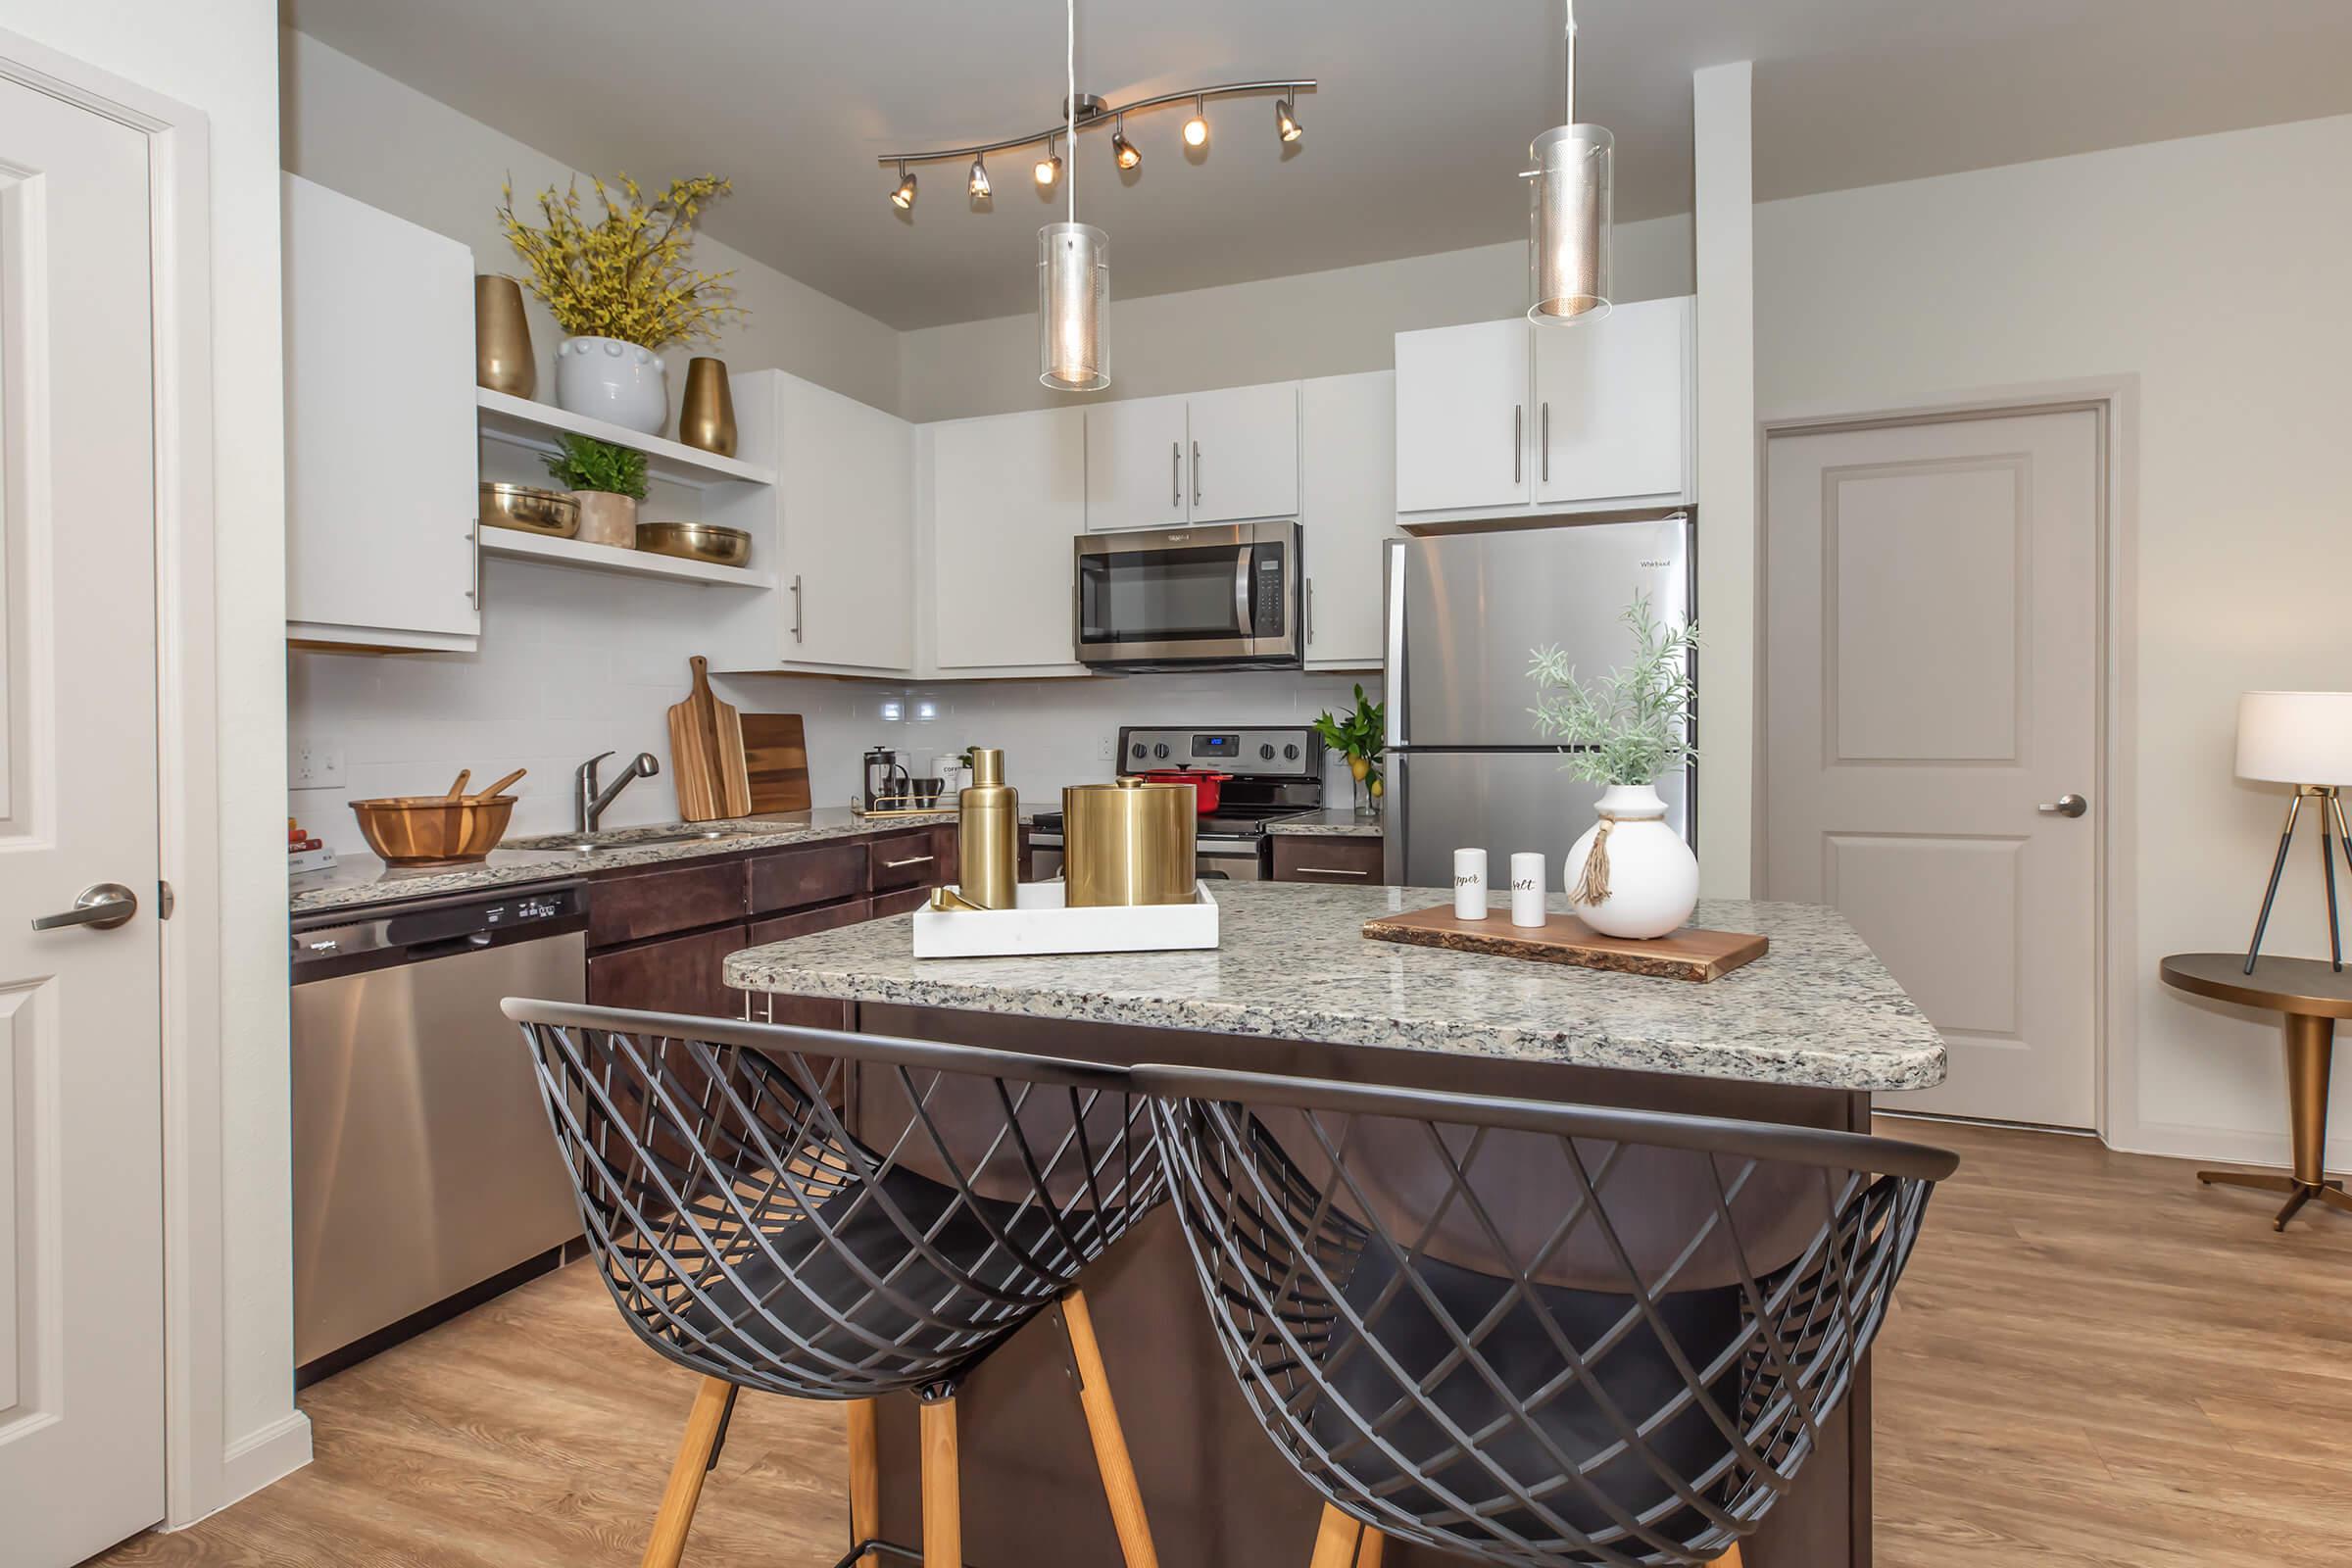 KITCHEN ISLAND IN SELECT HOMES